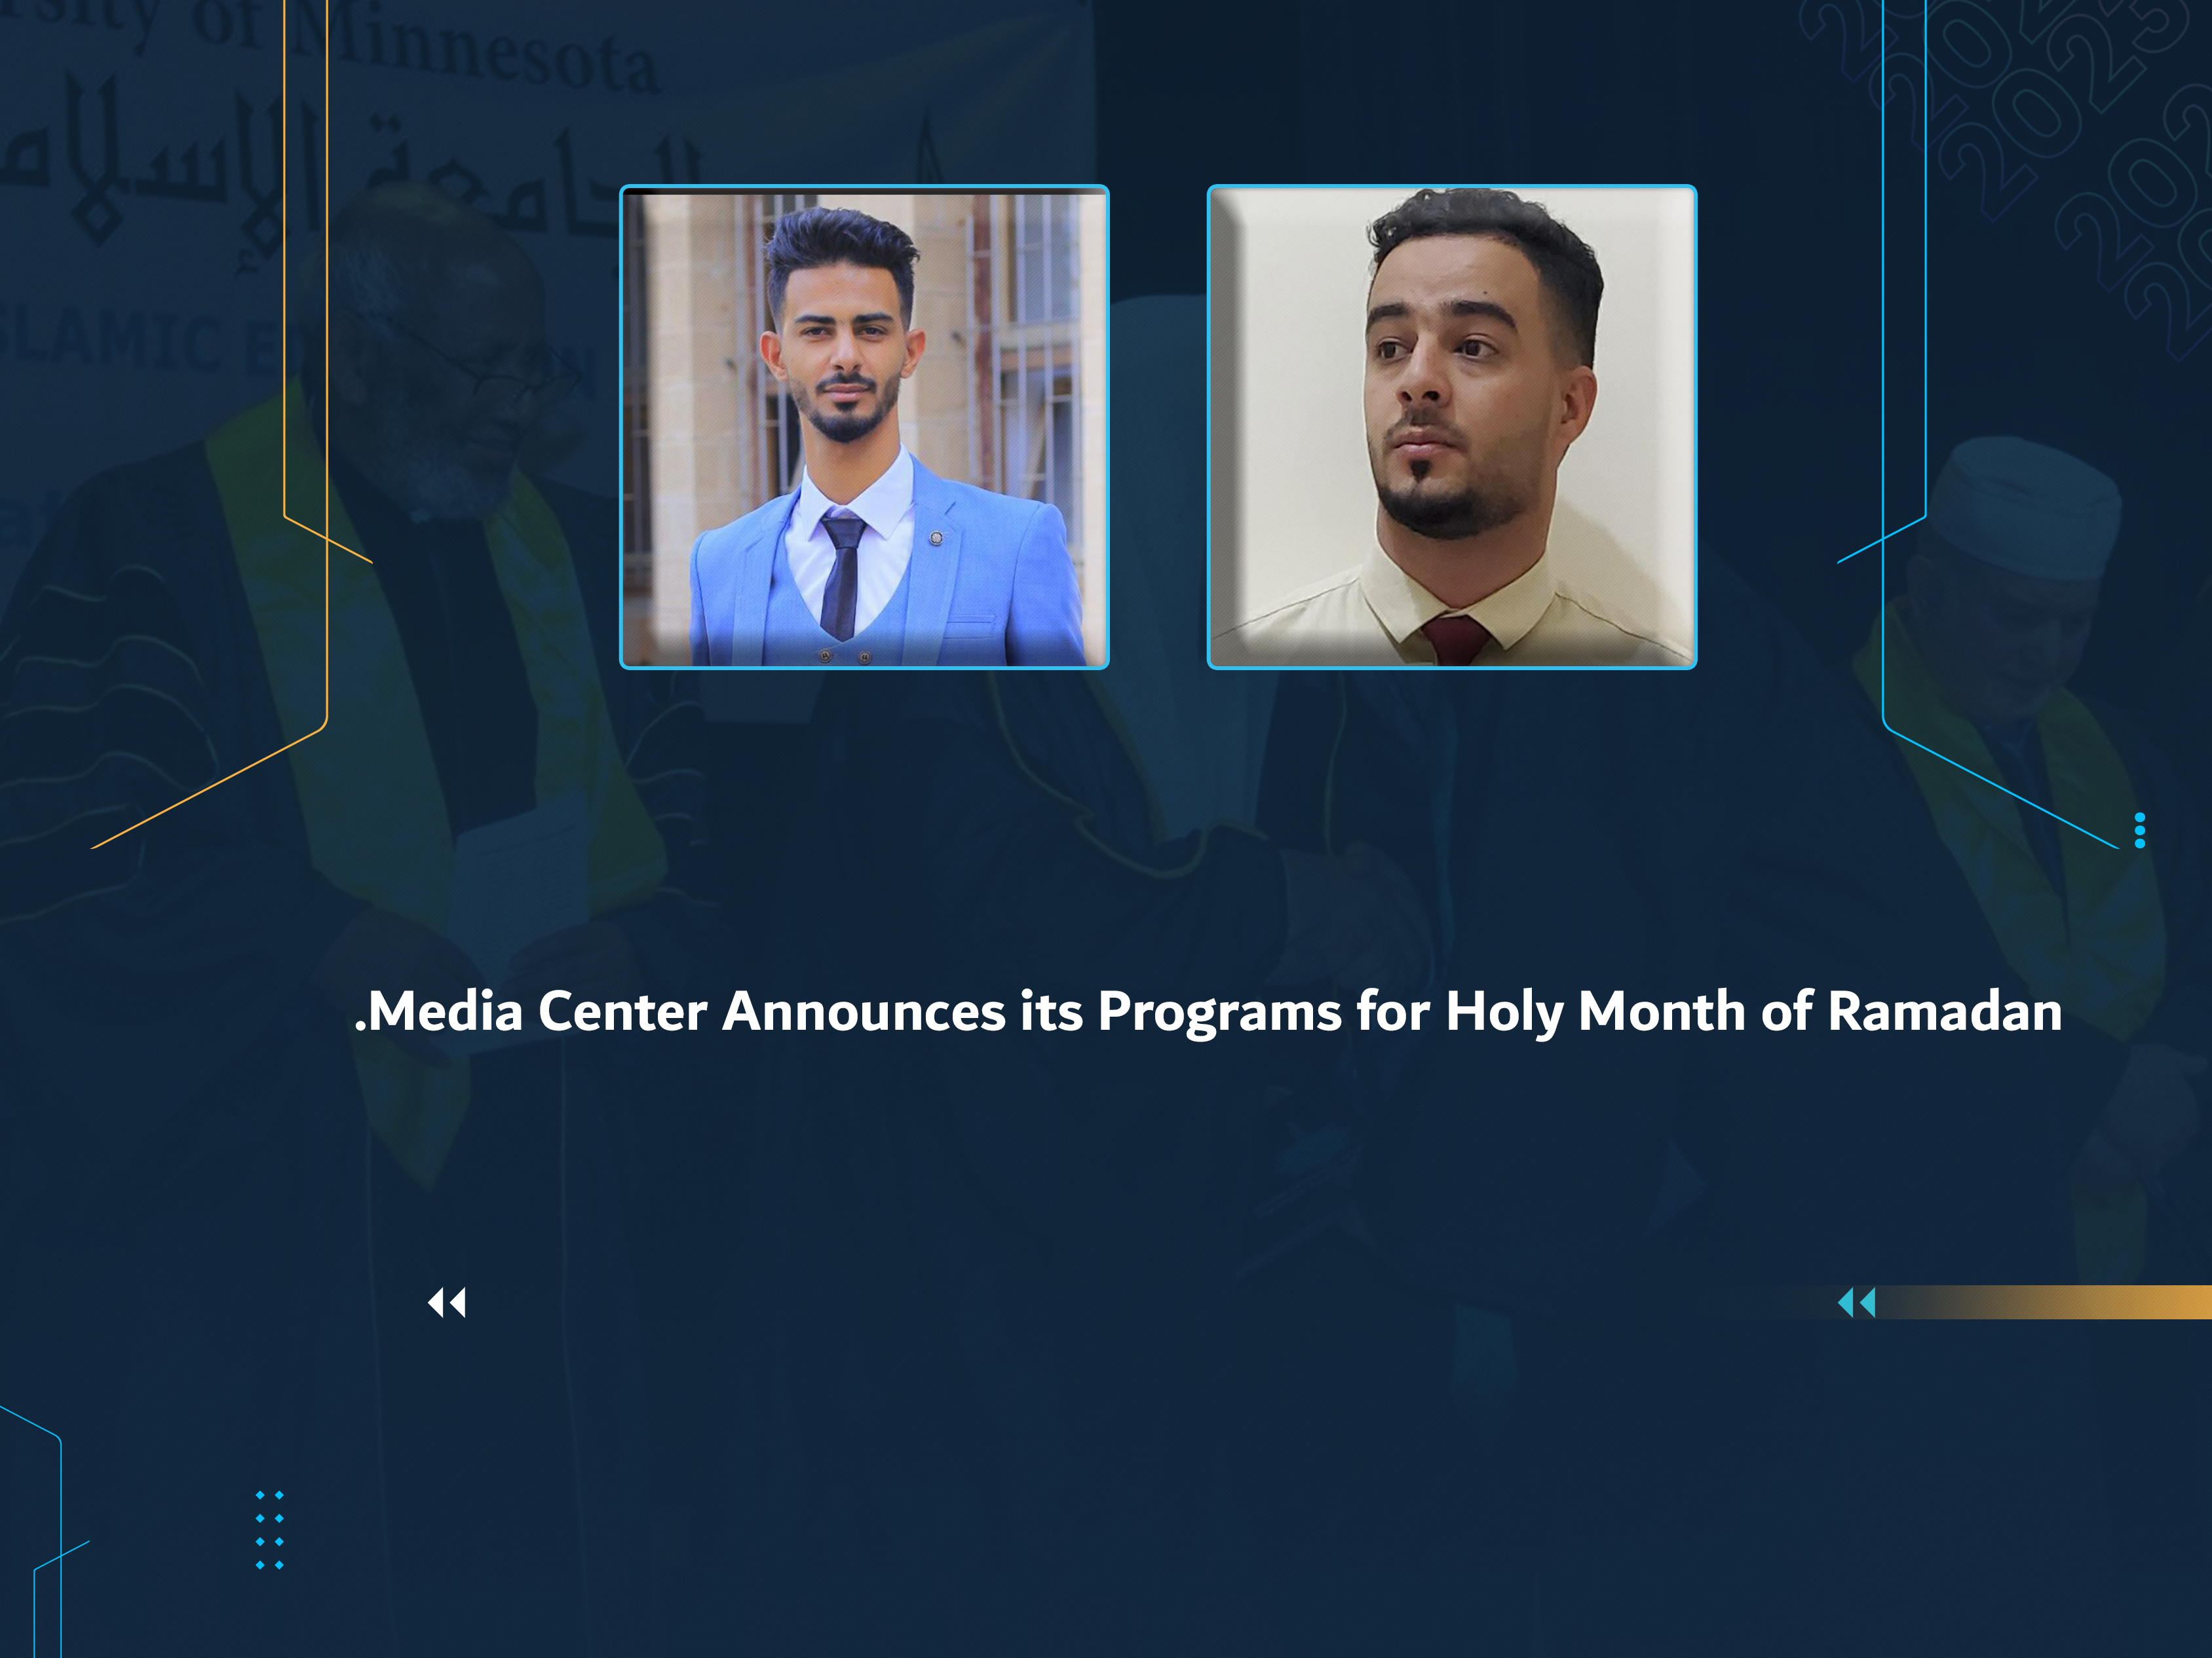 Media Center Announces its Programs for Holy Month of Ramadan.